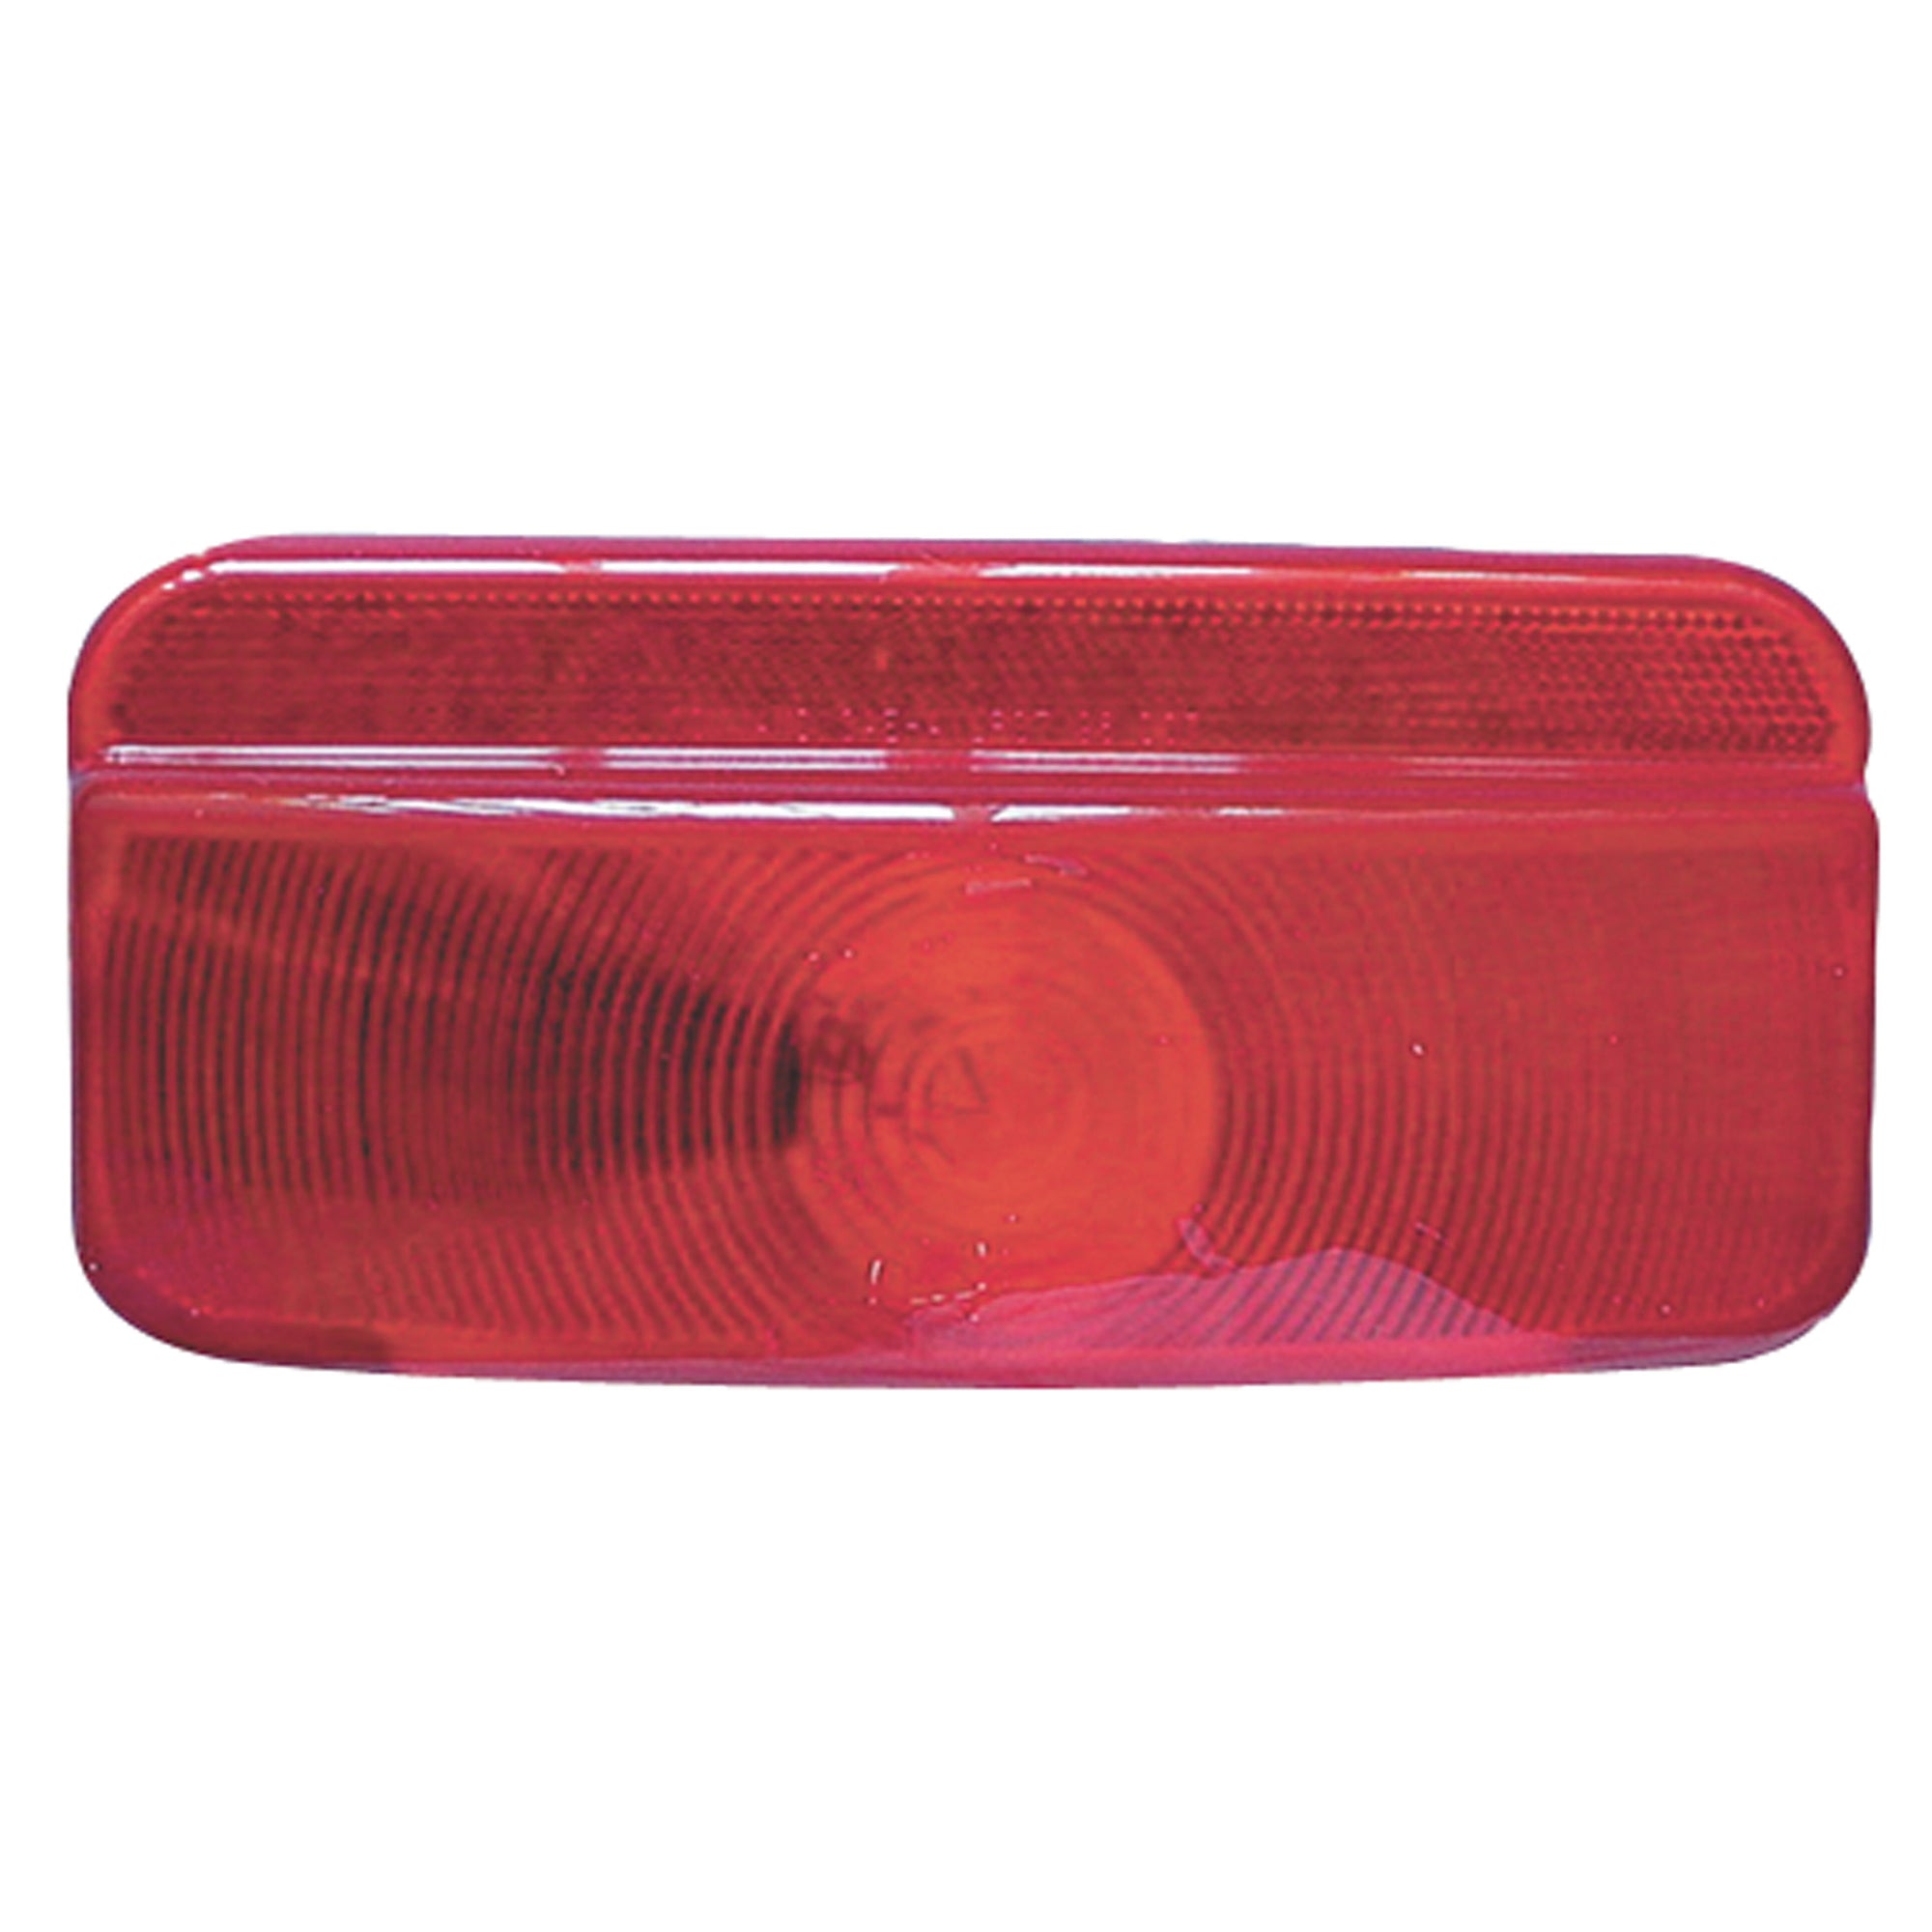 Fasteners Unlimited 003-81B Taillight Red Compact 12V